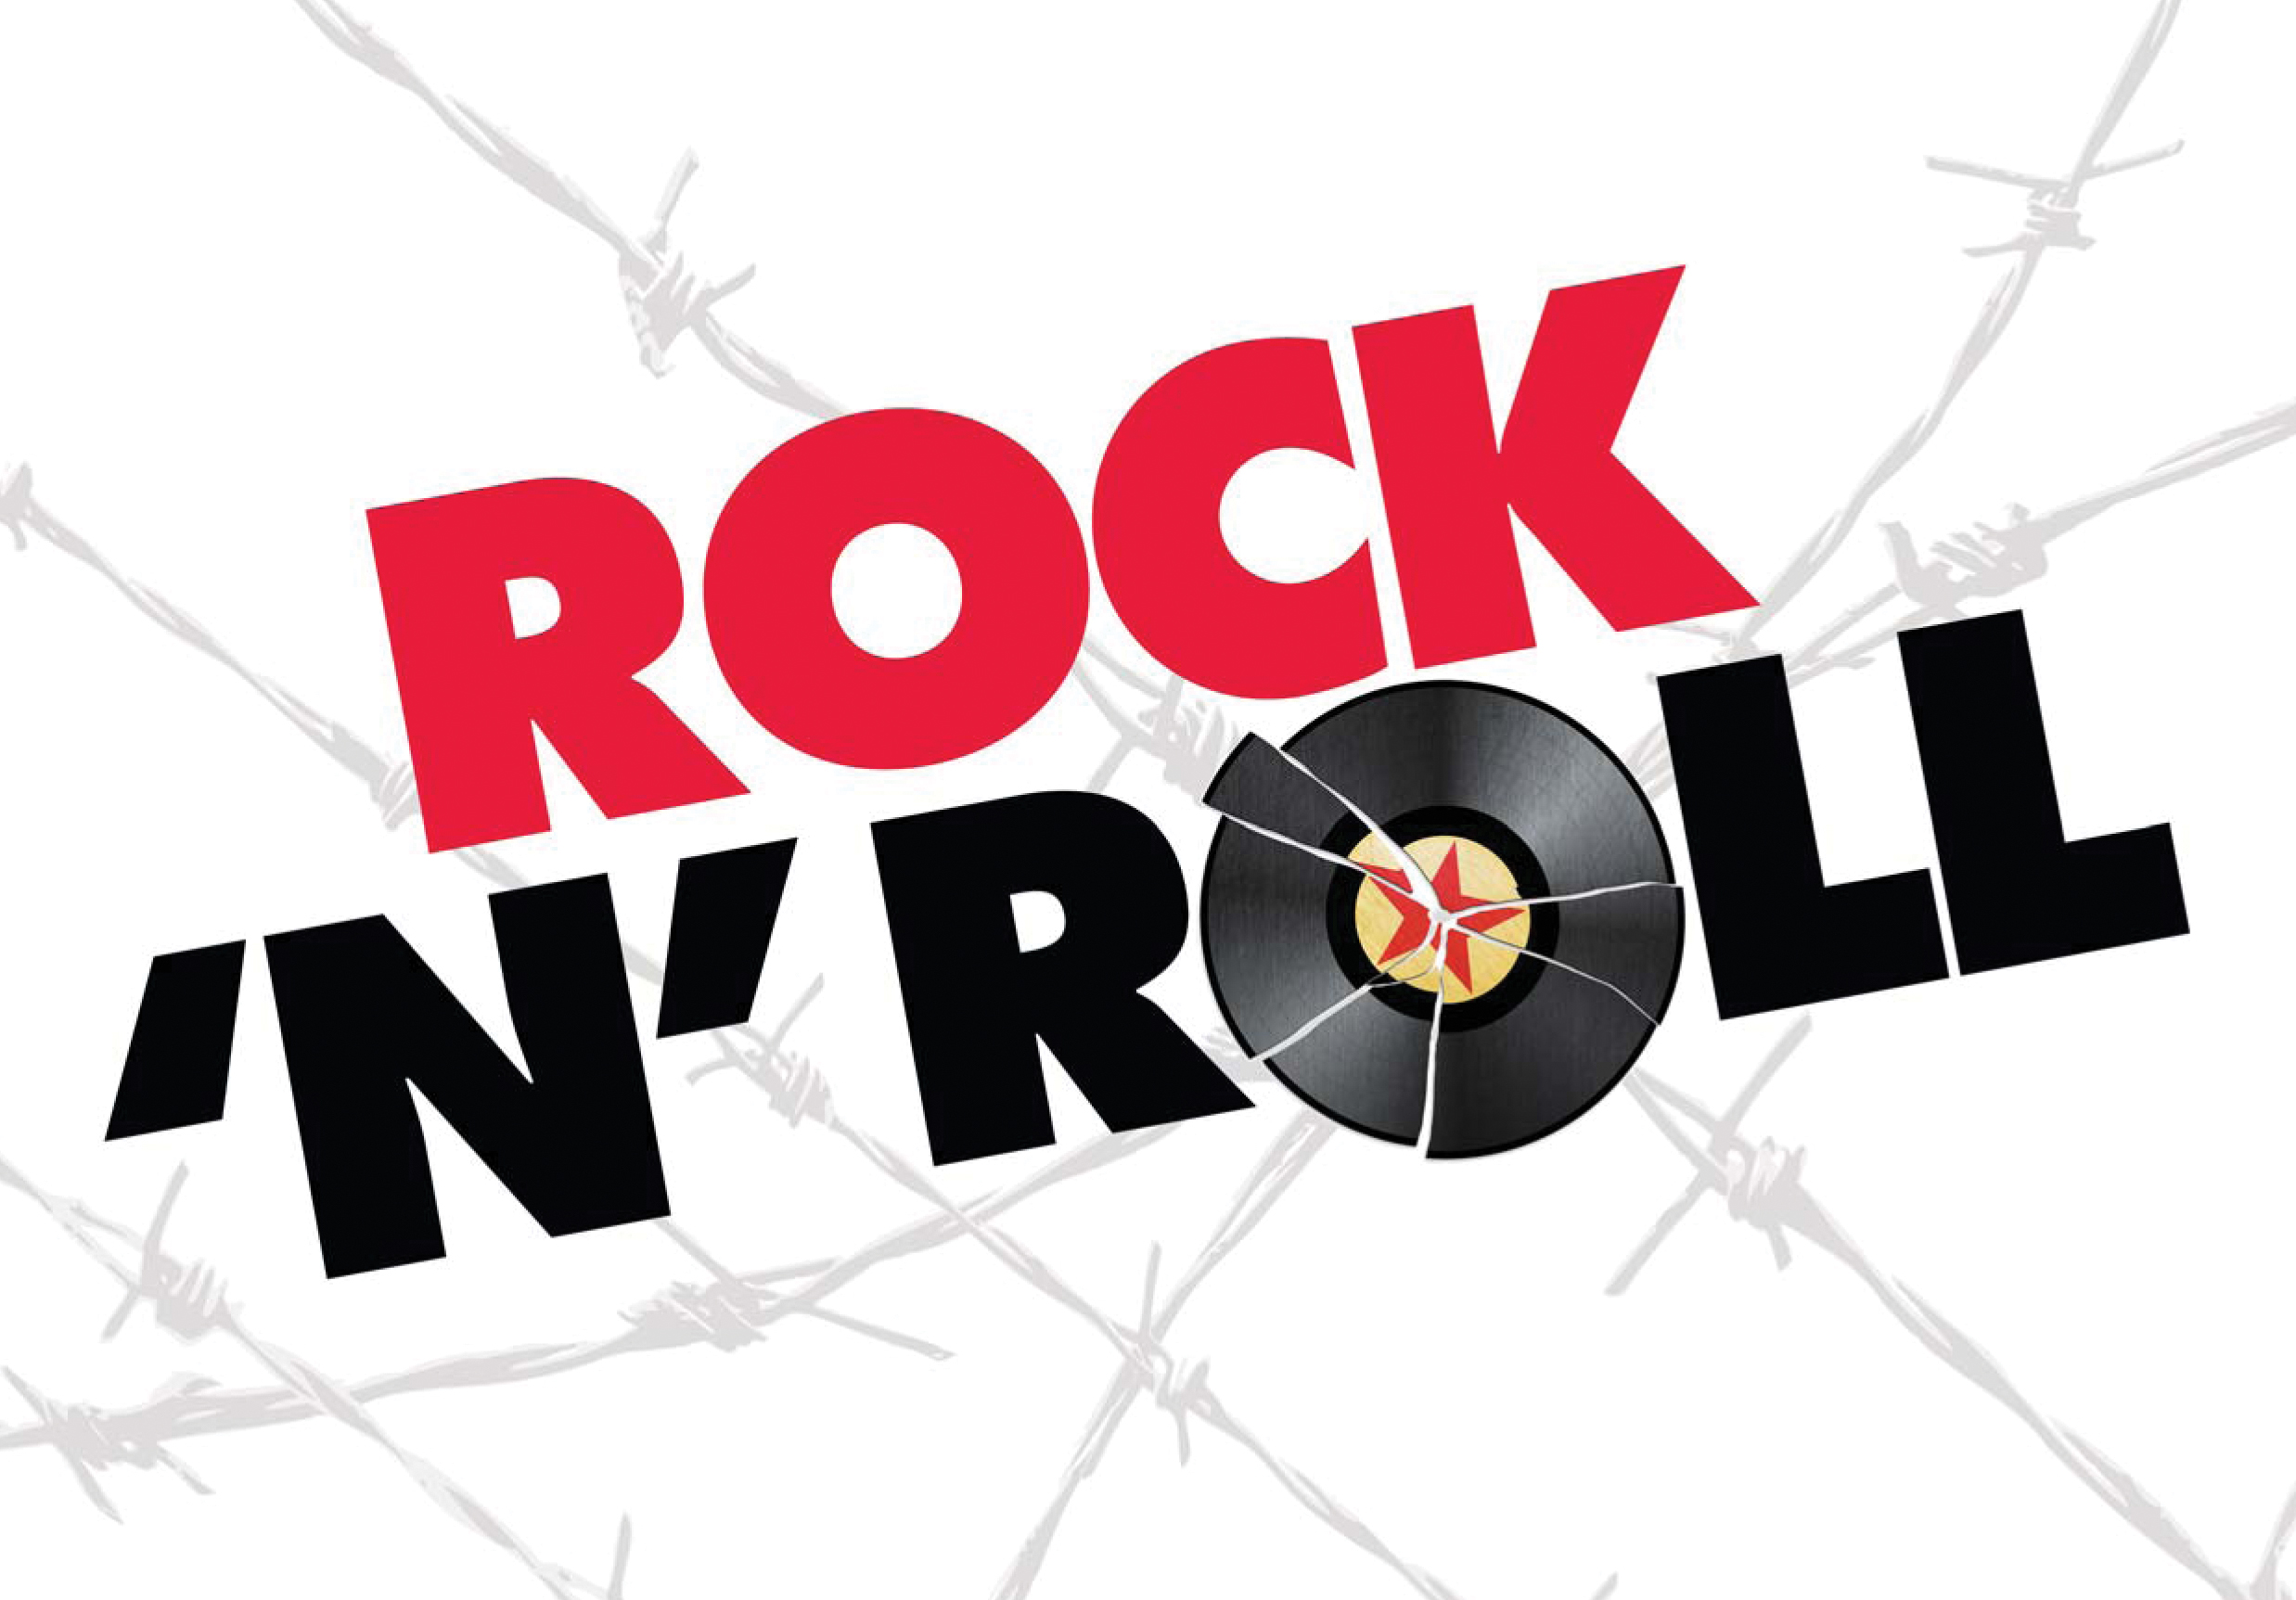 1000+ images about Rock N Rll | Web studio, Cute ...